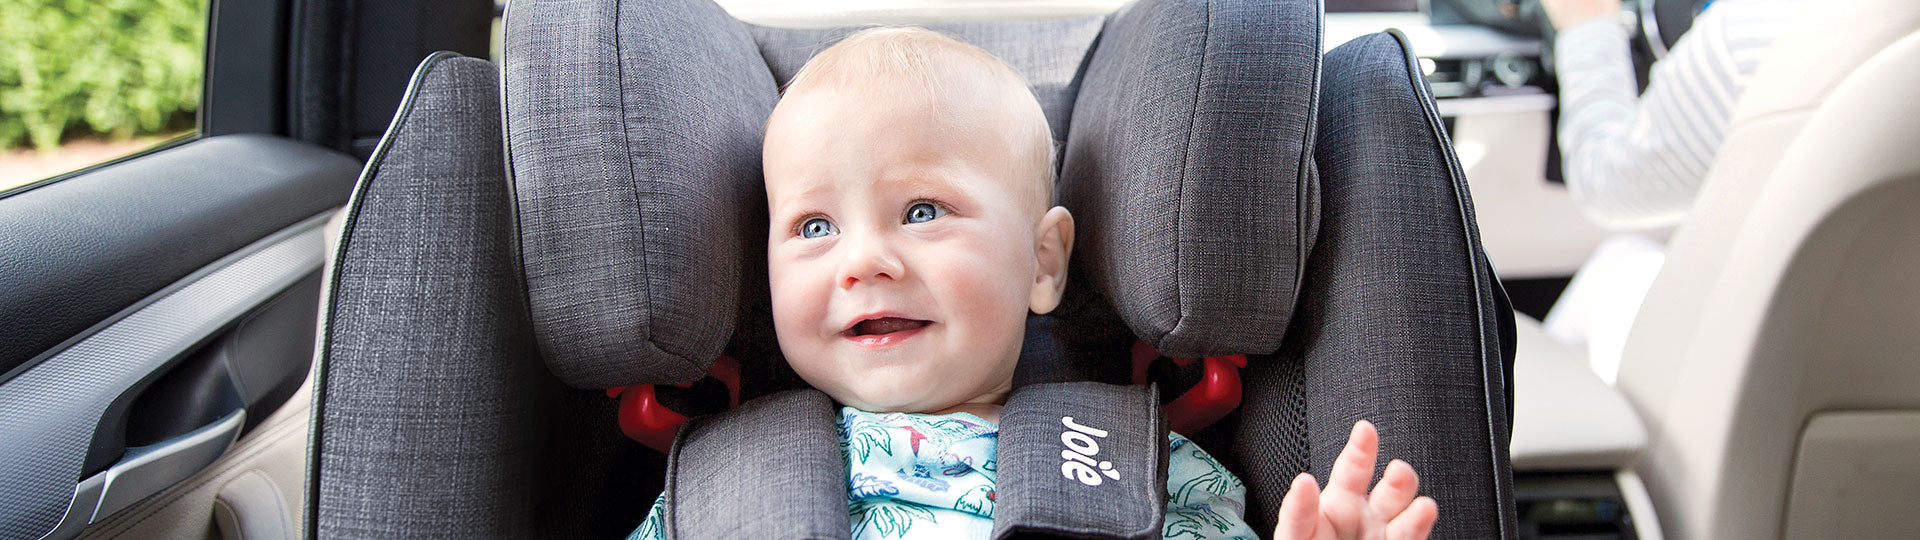 13 Best Car Seats for Your Baby in Malaysia 2021 - Infants & Toddlers